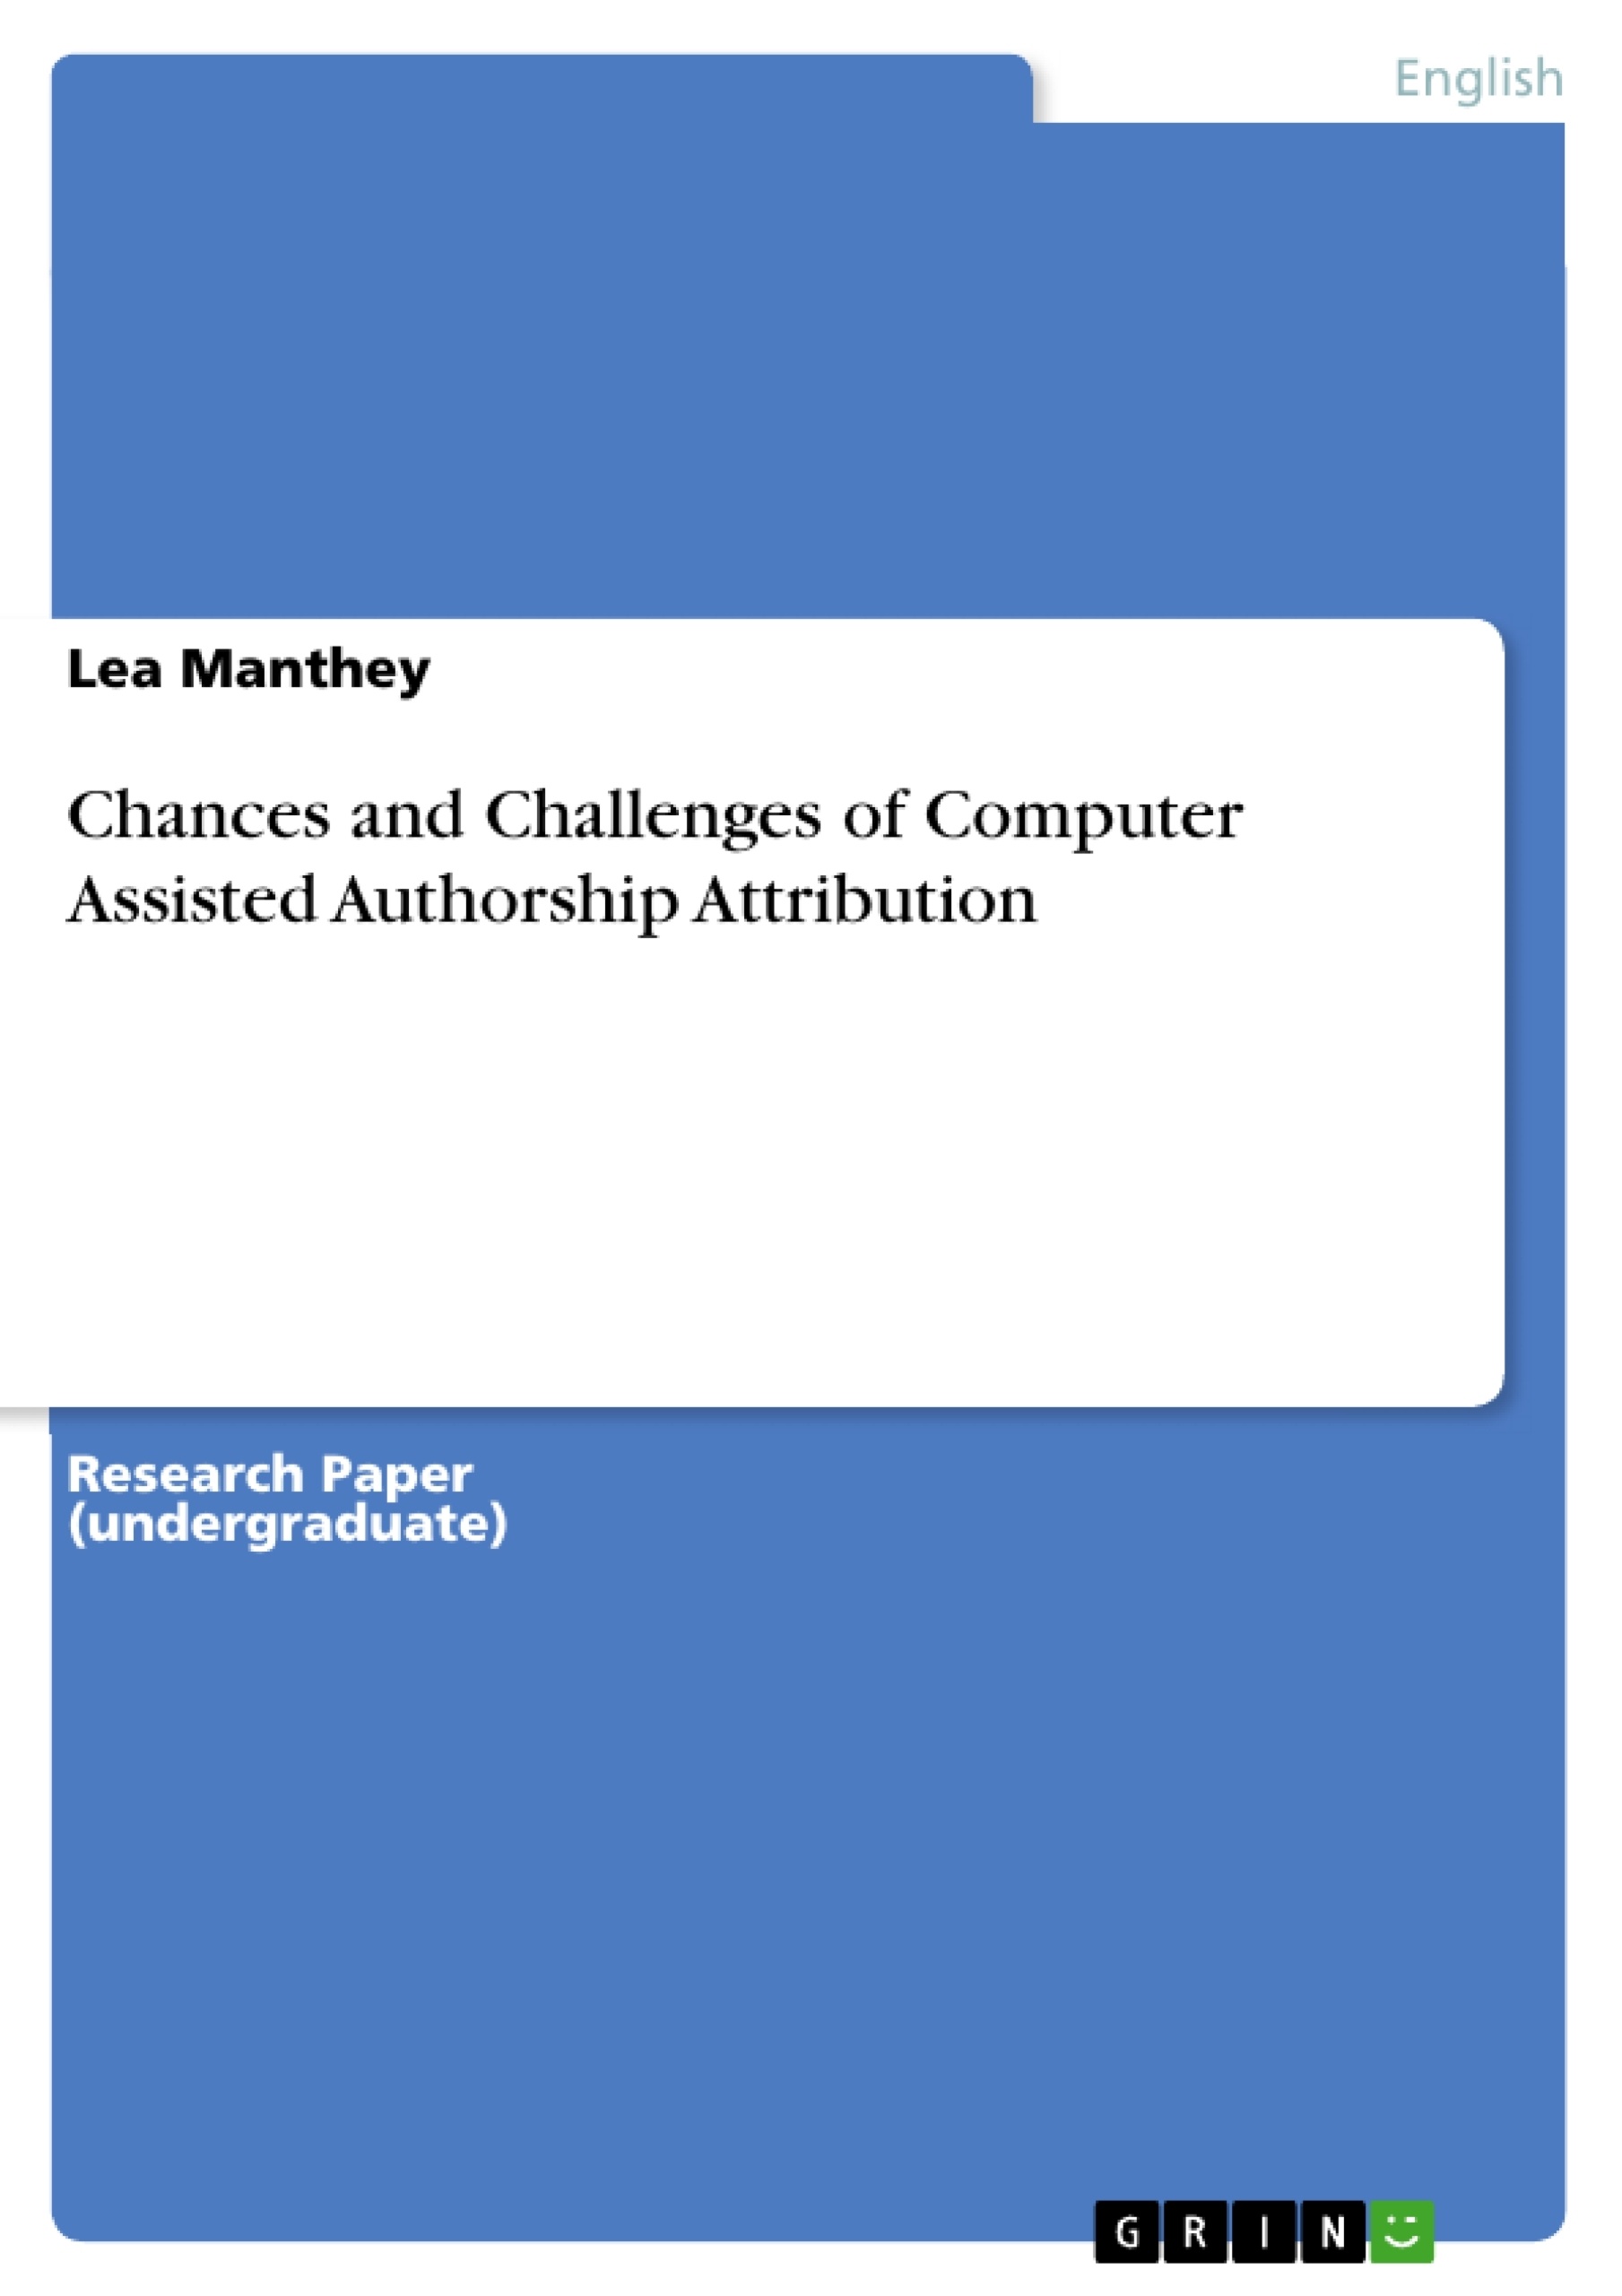 Título: Chances and Challenges of Computer Assisted Authorship Attribution